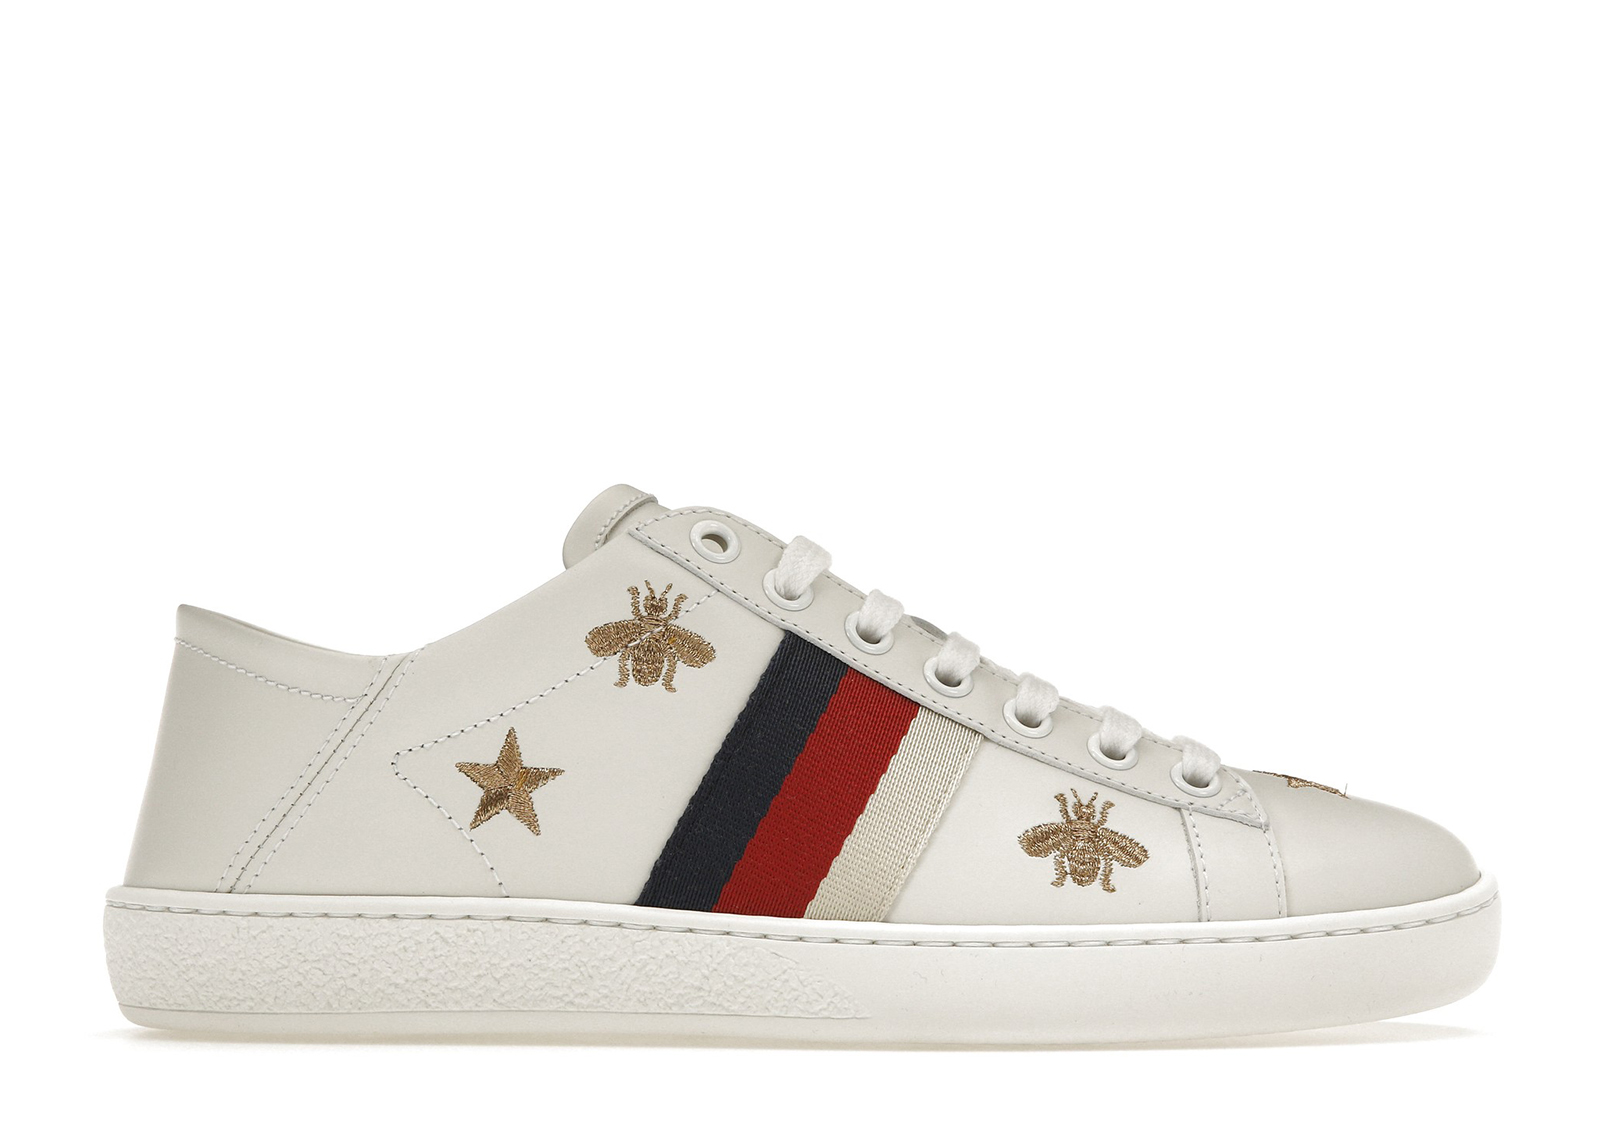 Gucci Ace Bees and Stars (Women's)